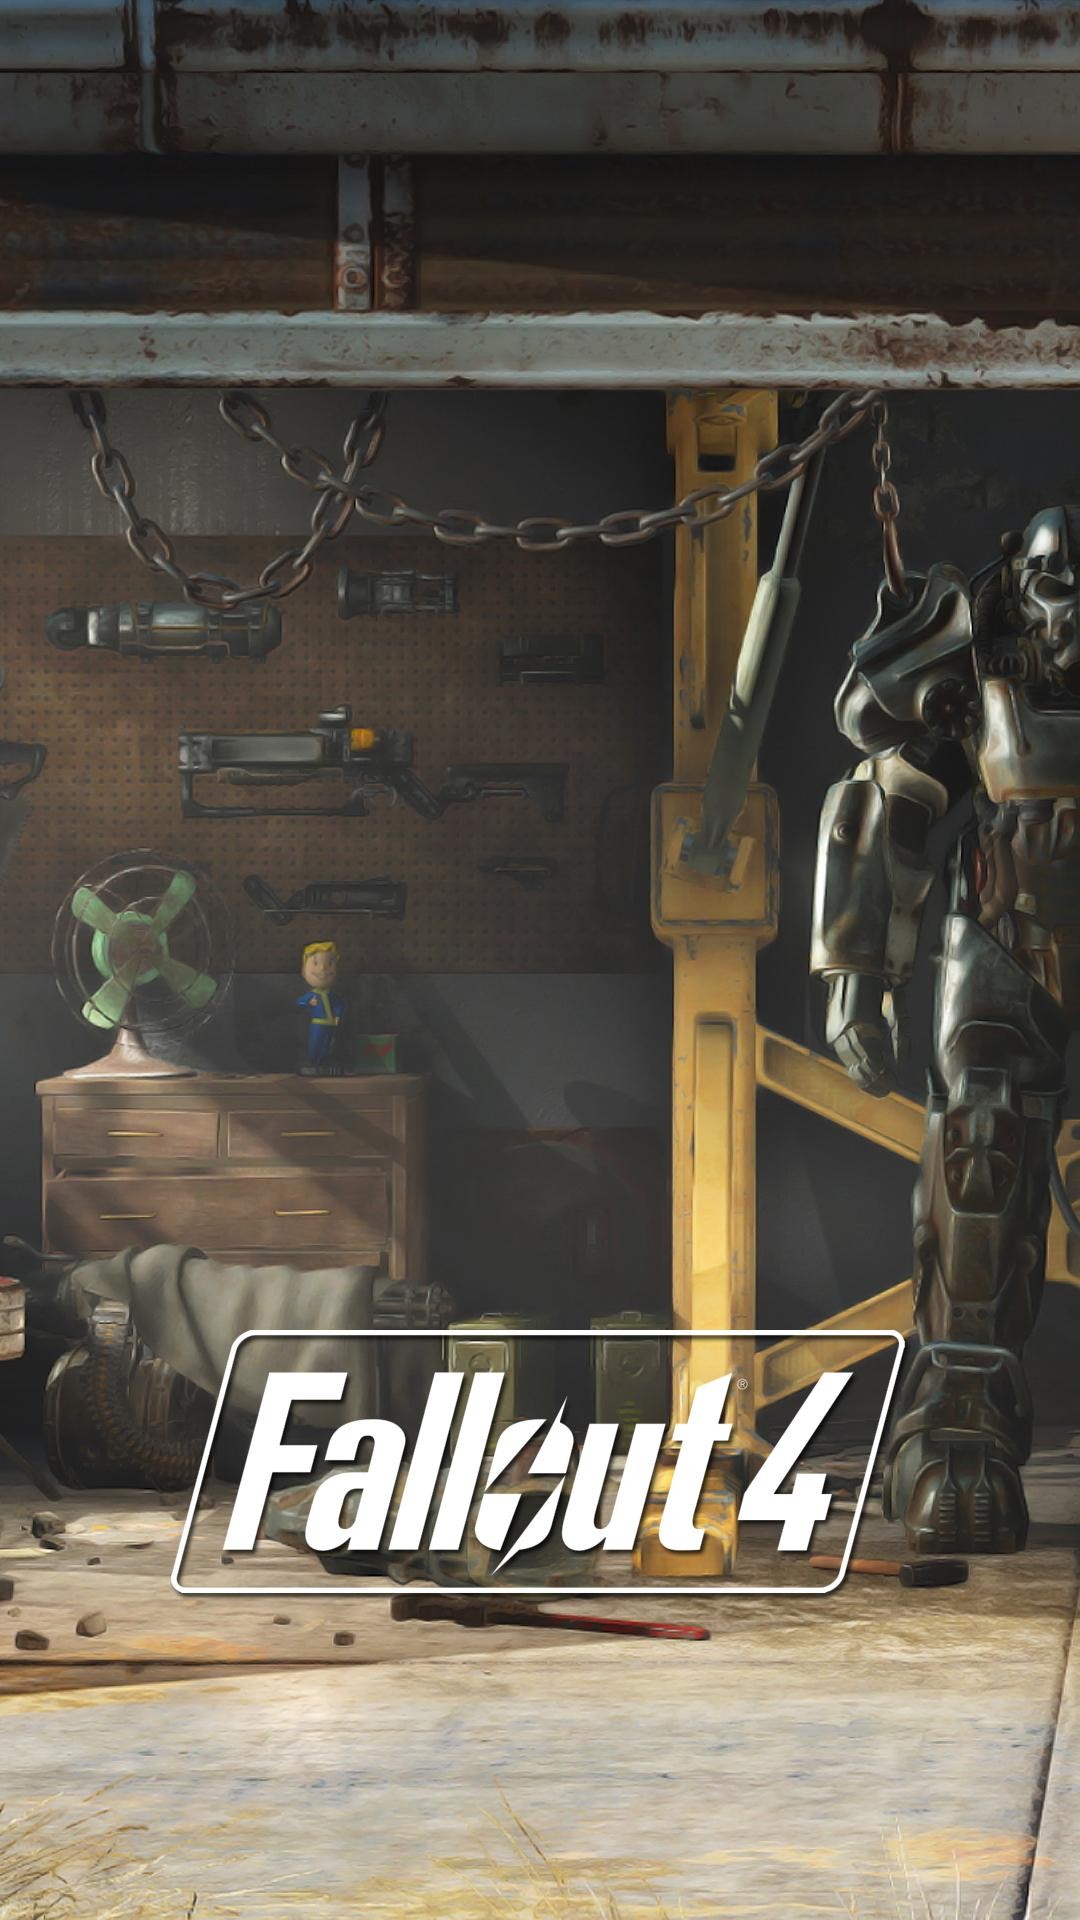 1080x1920 I made some Fallout 4 lock screen wallpapers from E3 stills [1080p] : gaming